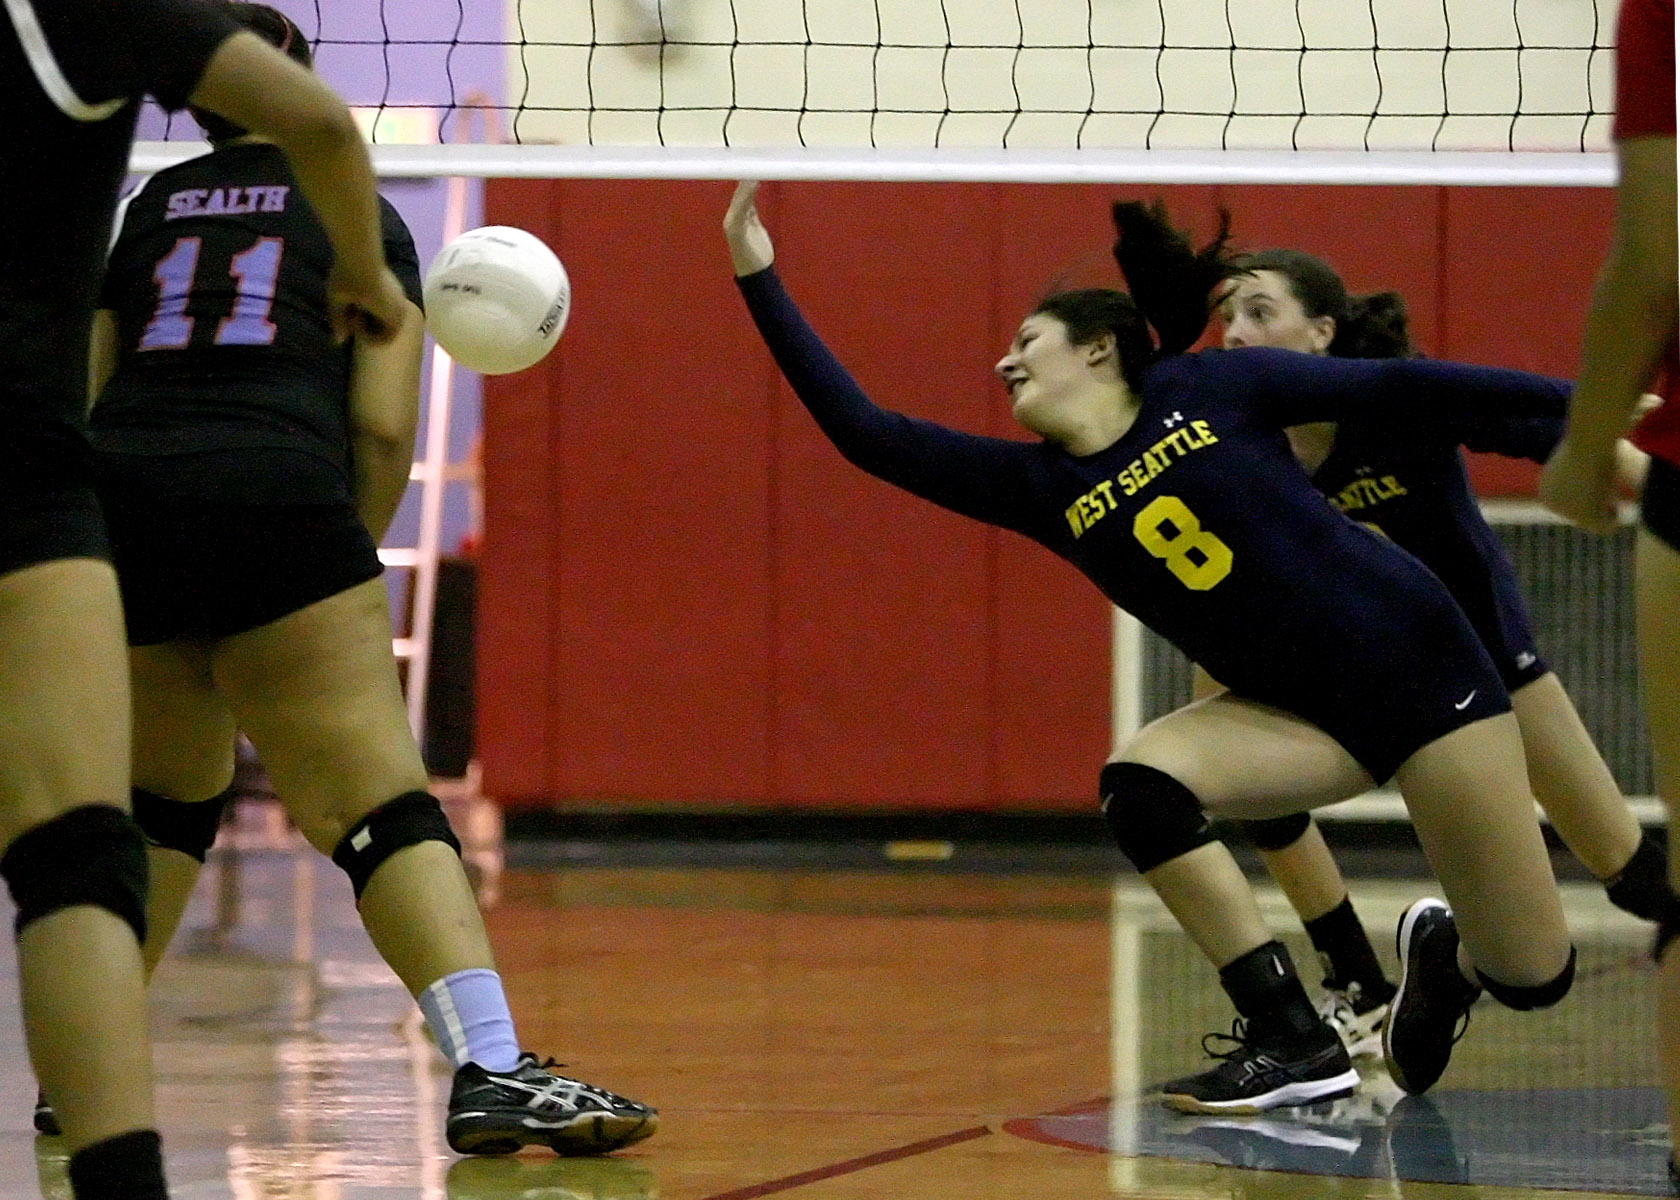 The ball just gets by Calista Januto of West Seattle.